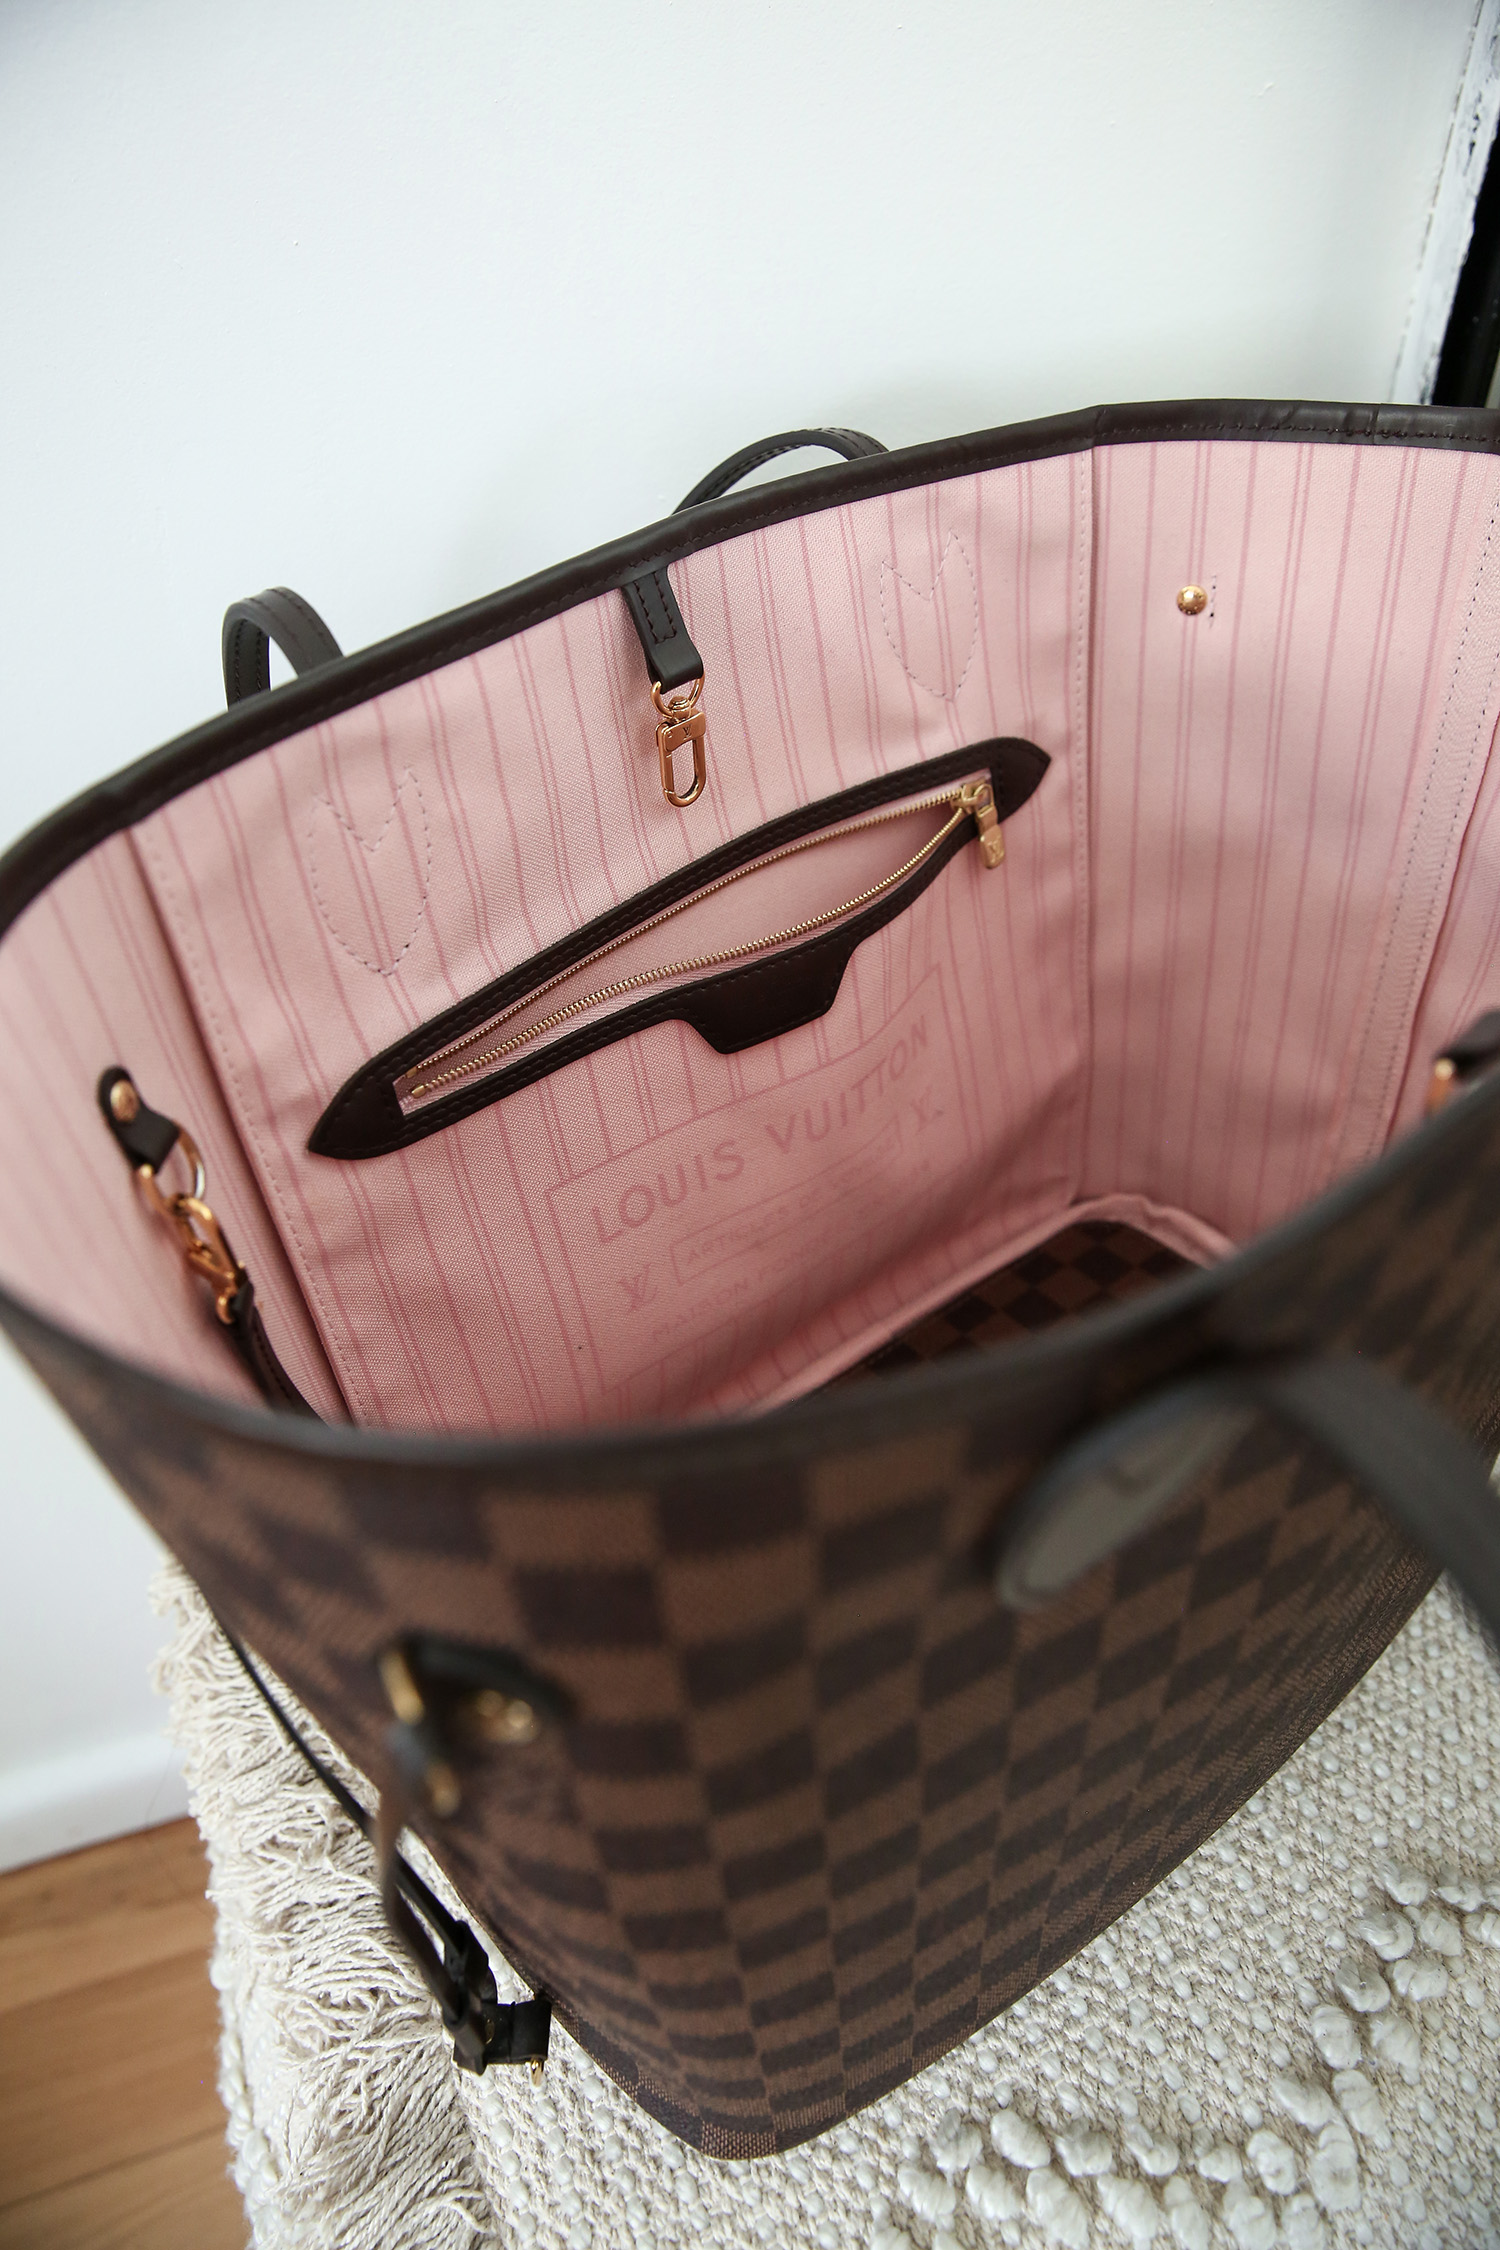 Louis Vuitton's Neverfull bag price and why you should go for it?